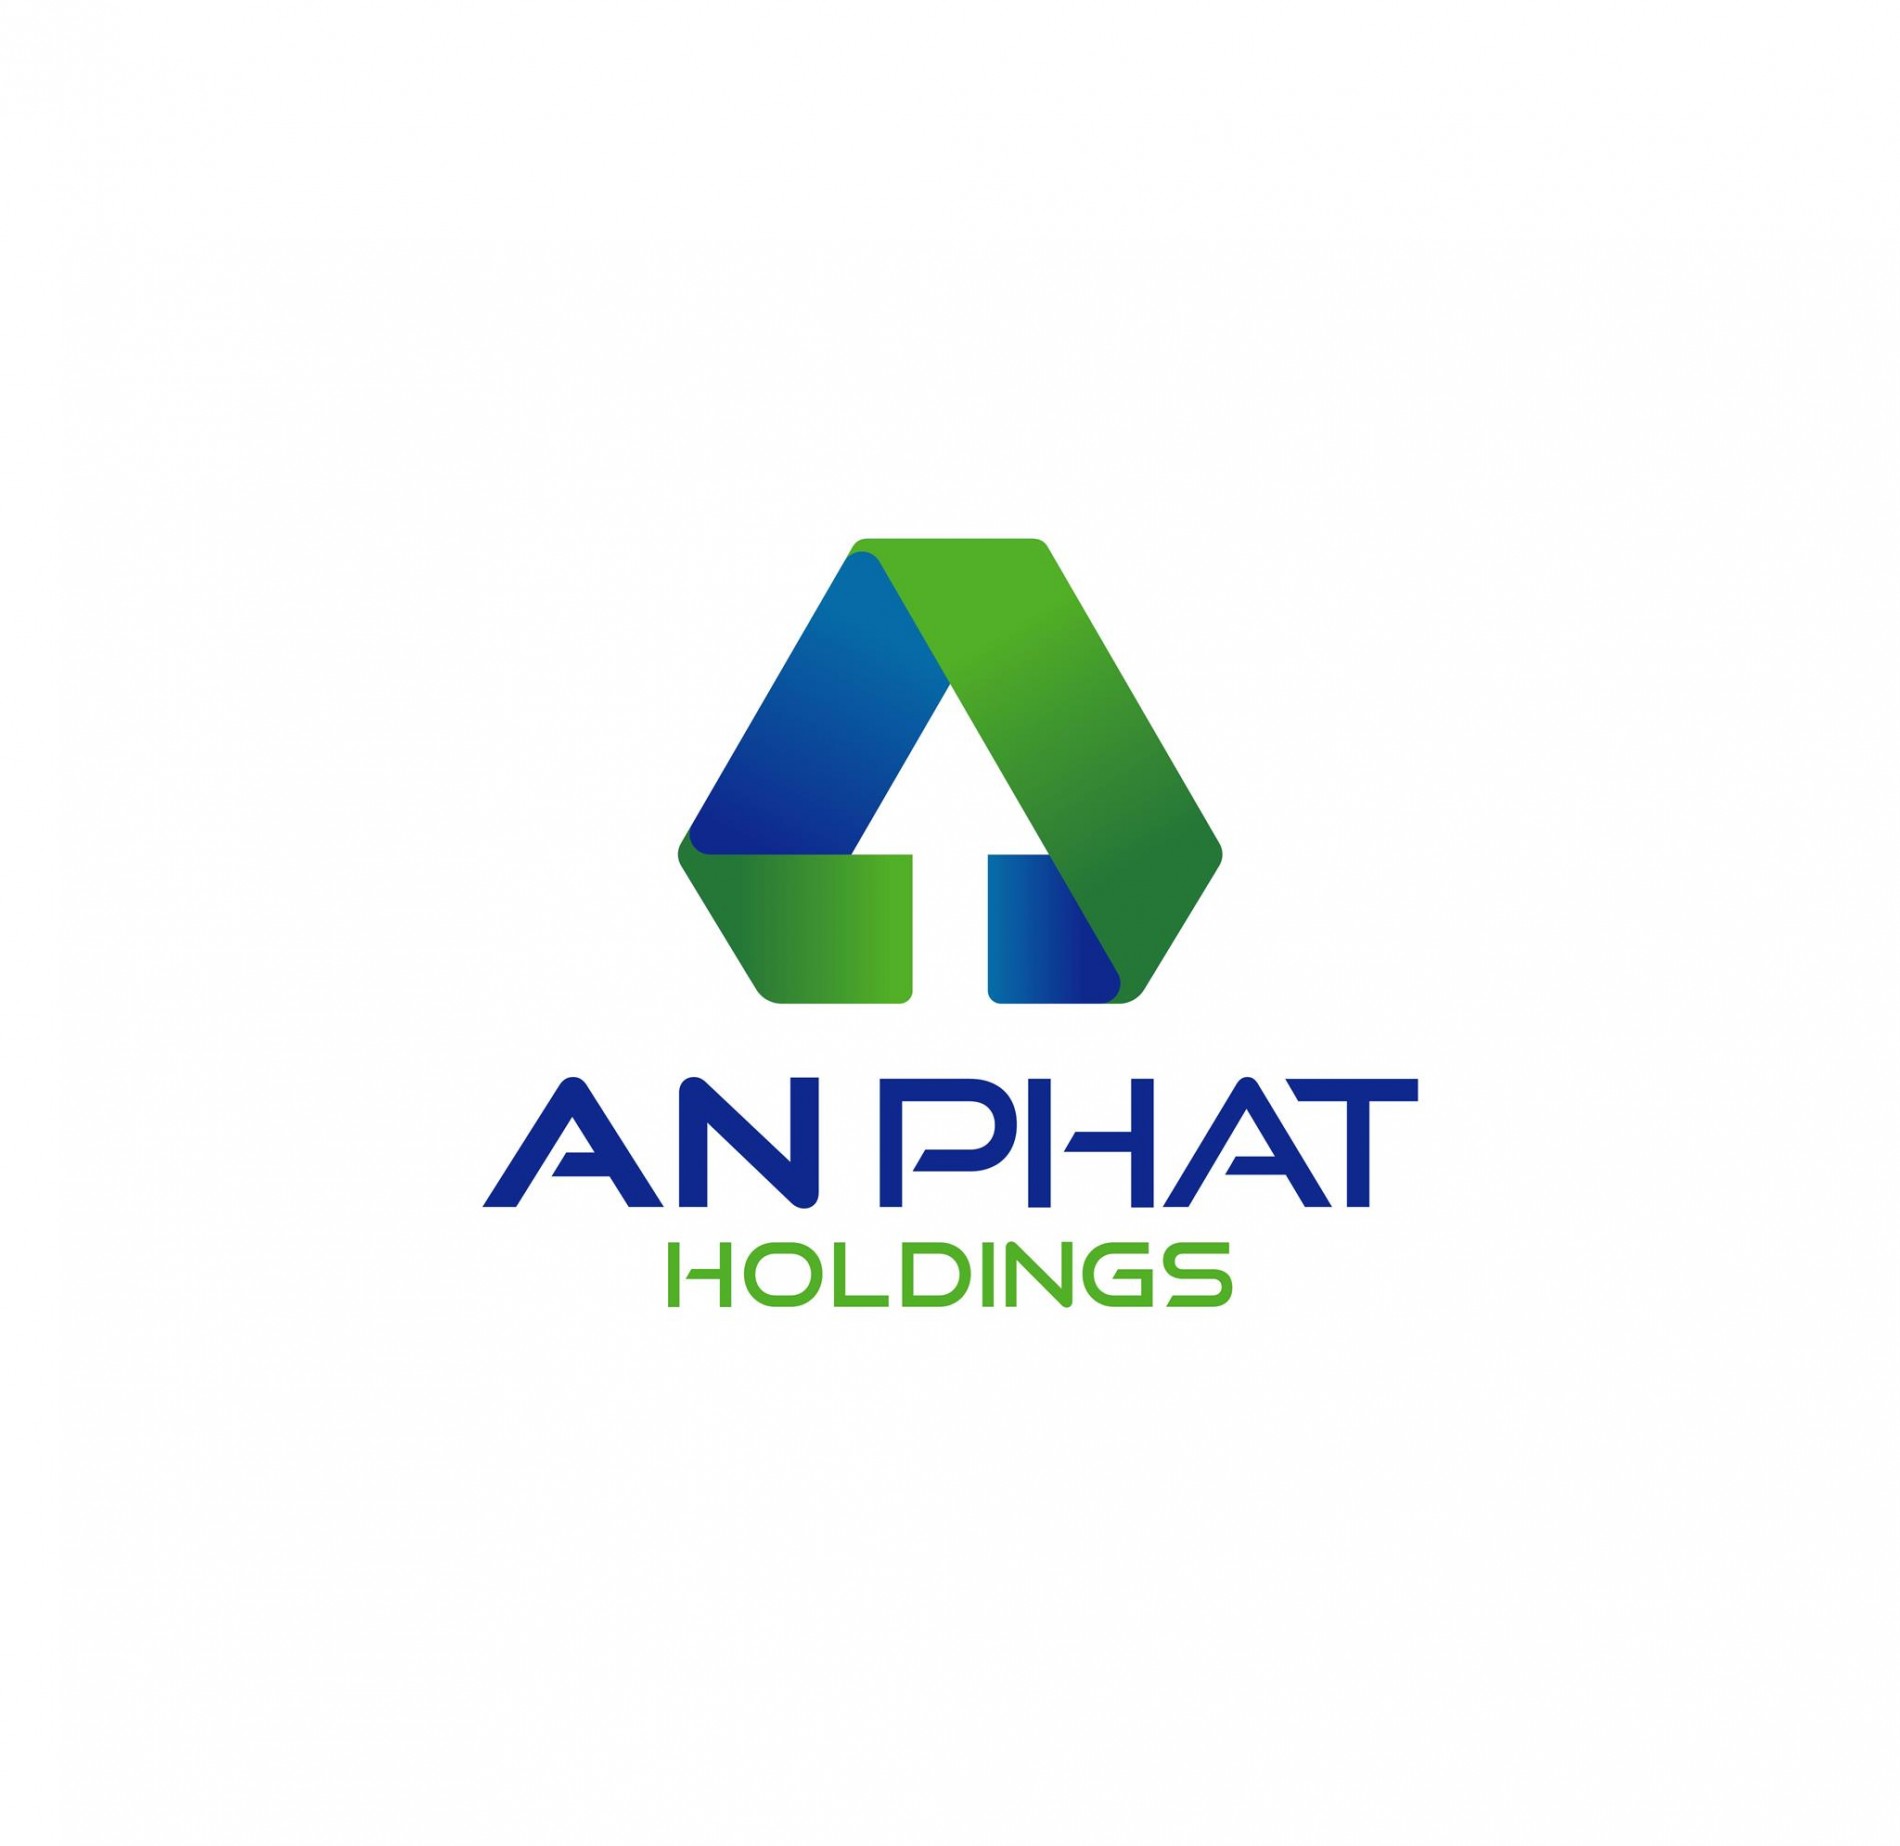 anphat_holdings-01